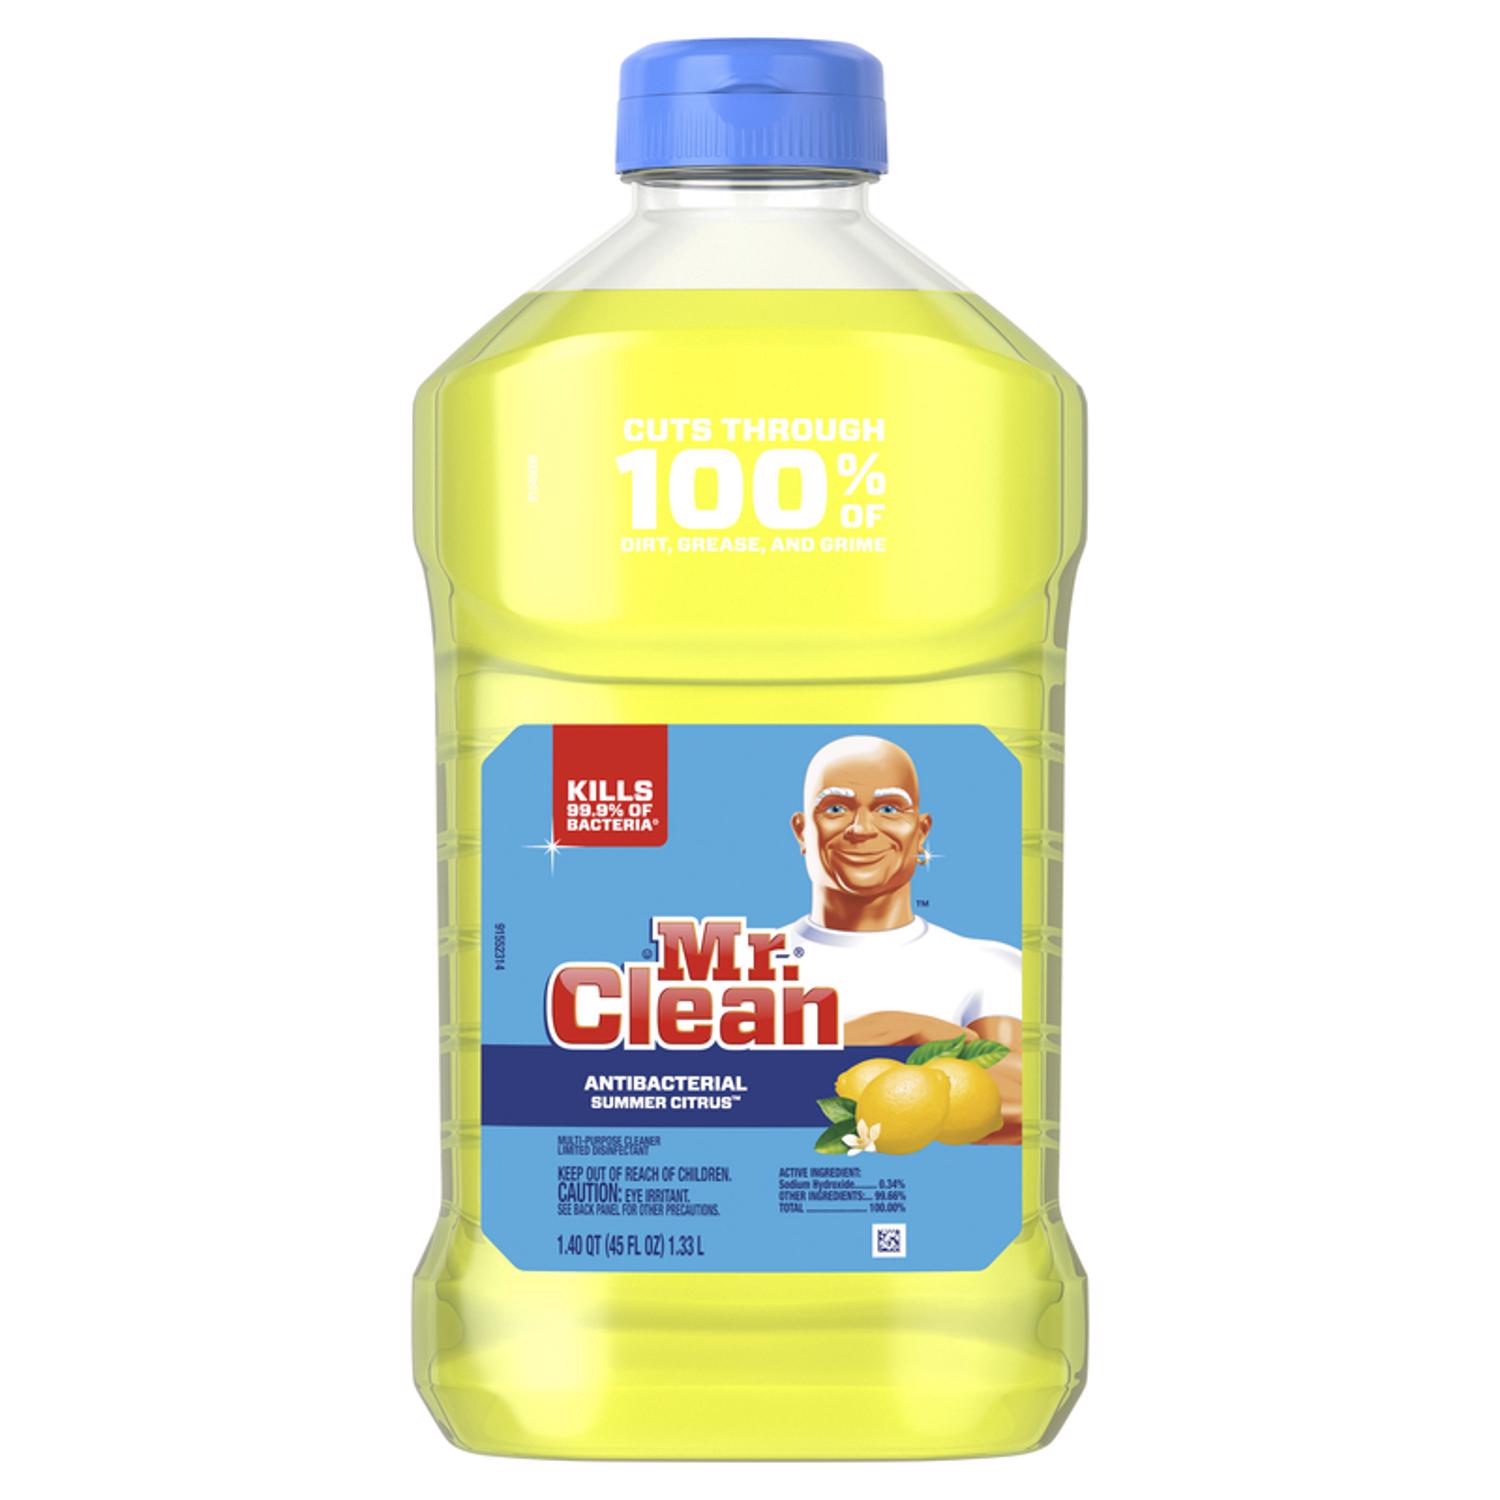 Mr. Clean Clean Freak Mist Spray Refill 16-fl oz Lemon Zest Liquid  All-Purpose Cleaner in the All-Purpose Cleaners department at